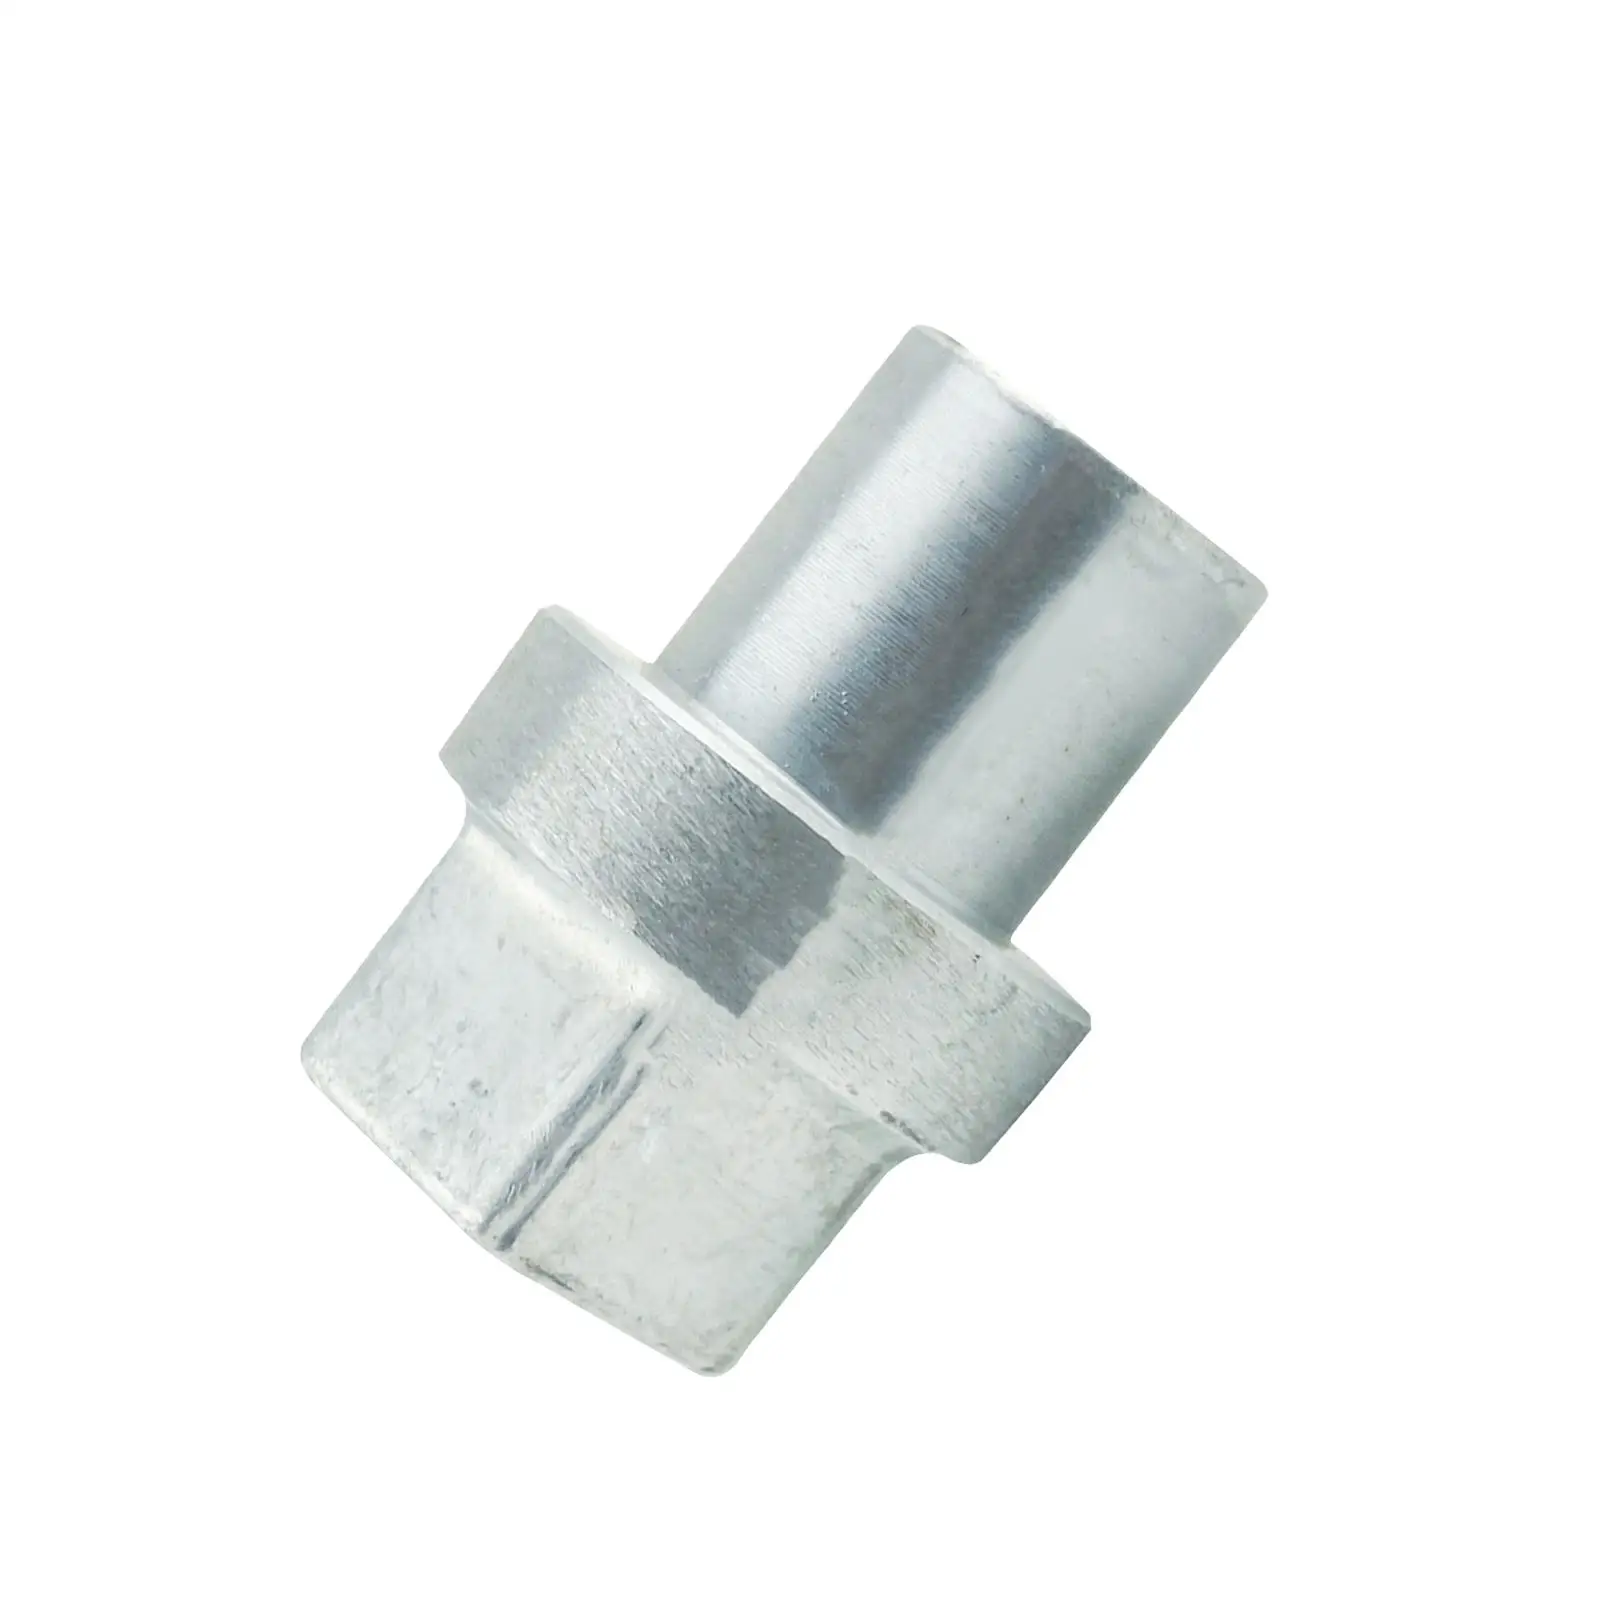 Zinc Anode 67F-45251 Outboard Engine Zinc Anode for Yamaha 4 Stroke